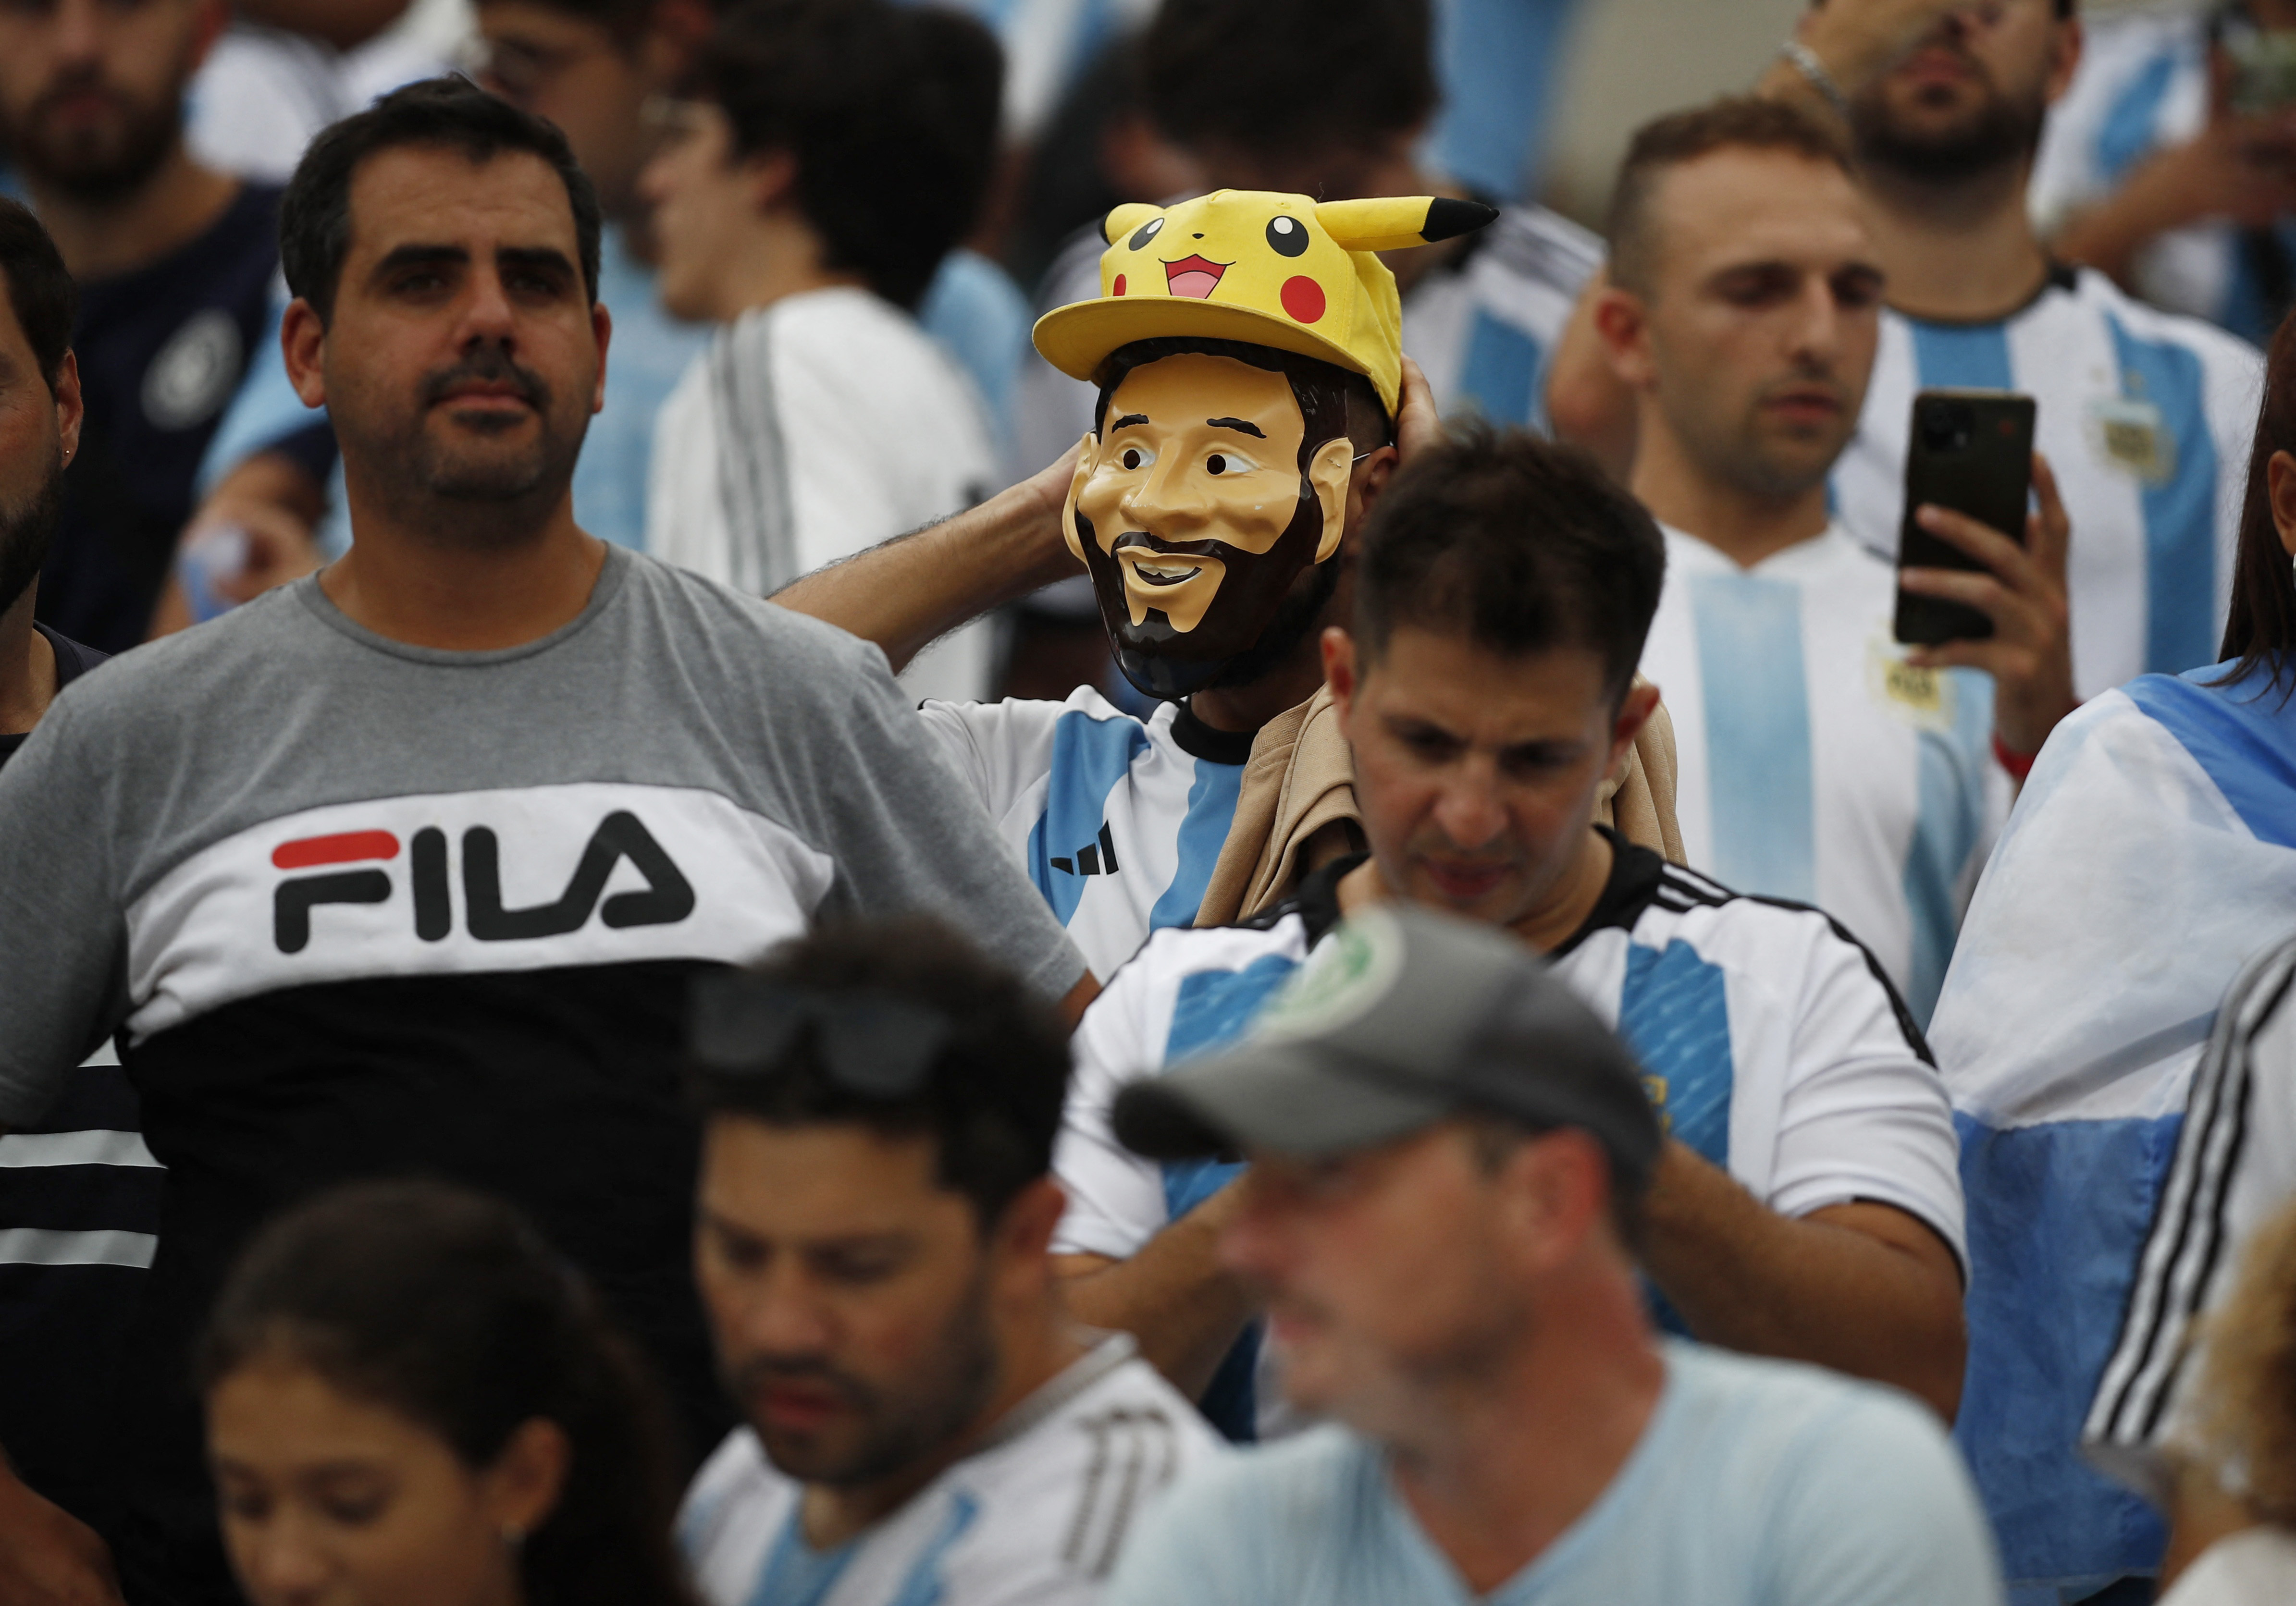 Once inside the venue, people began to give it color and Leo Messi's reference was present, as was the case with the mask that this fan wore 